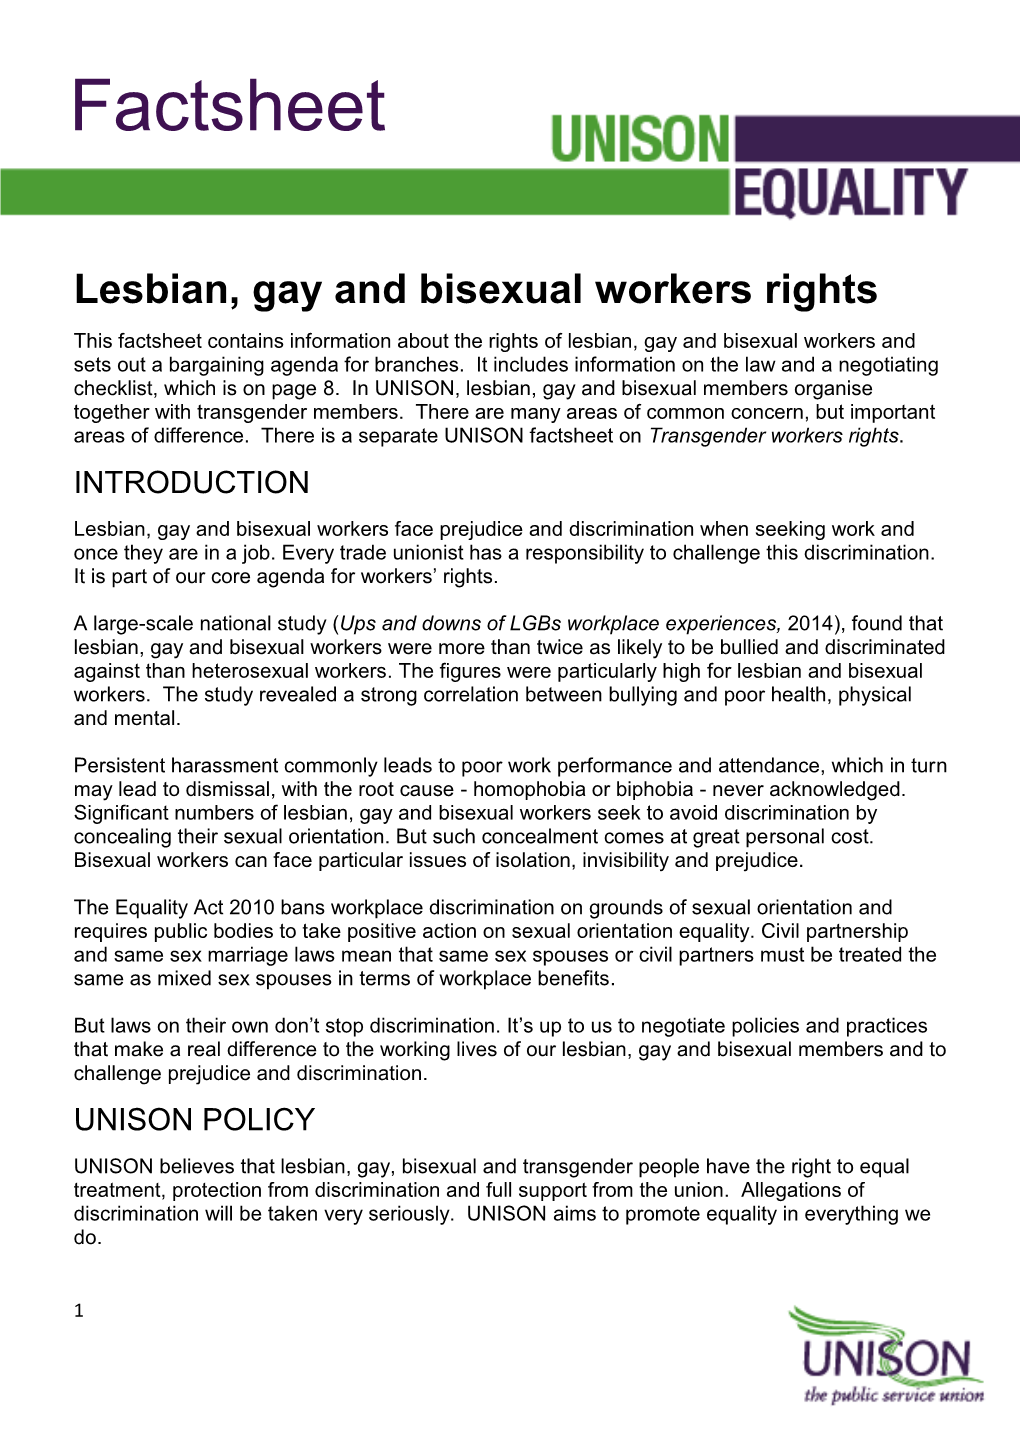 Lesbian, Gay and Bisexual Workers' Rights